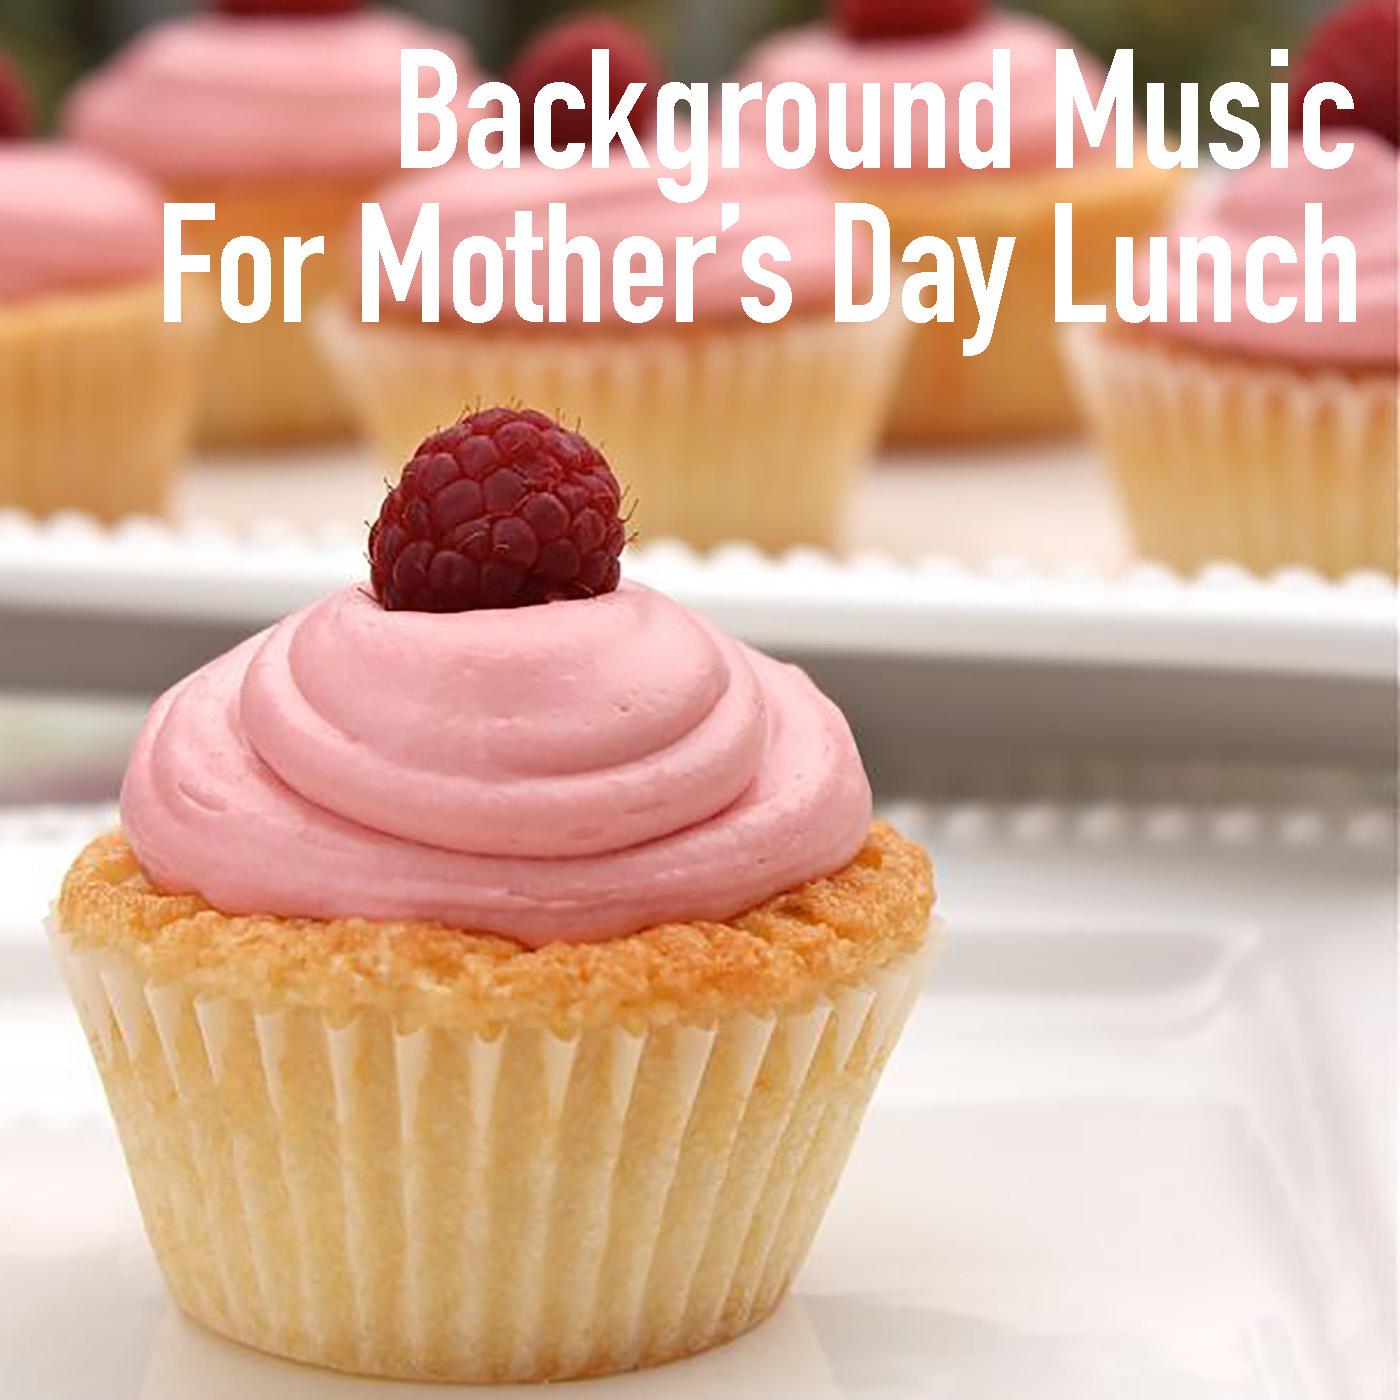 Background Music For Mother's Day